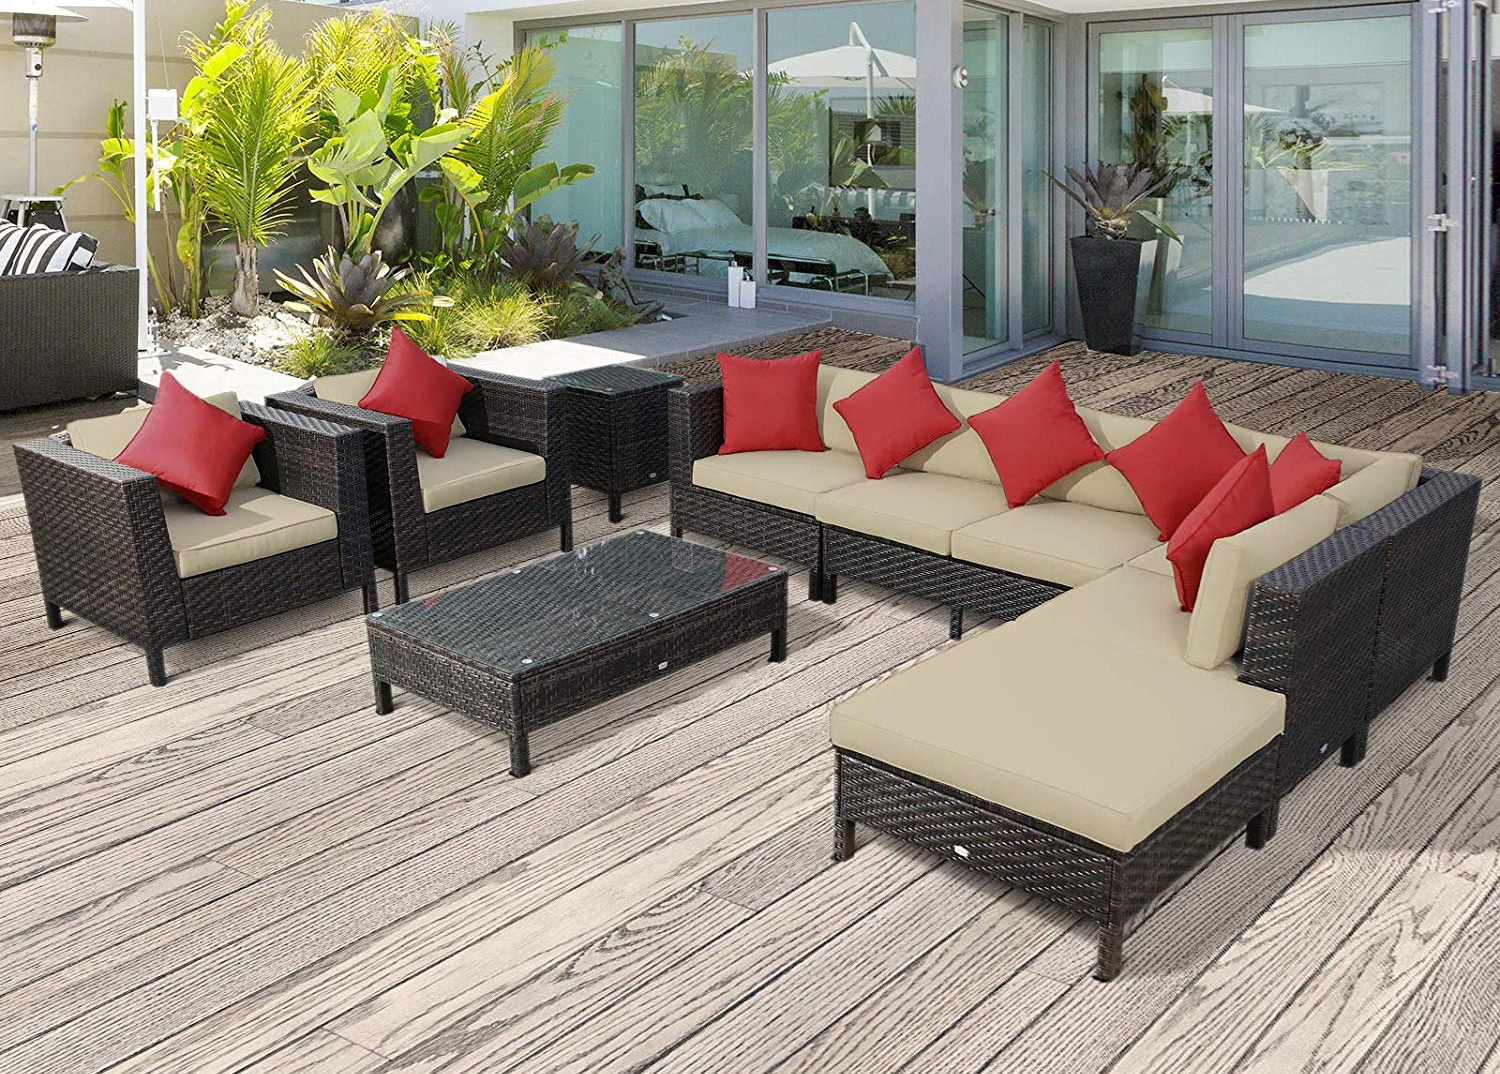 Top 10 Best Outdoor Patio Furniture Sets in 2020 Reviews | Guide